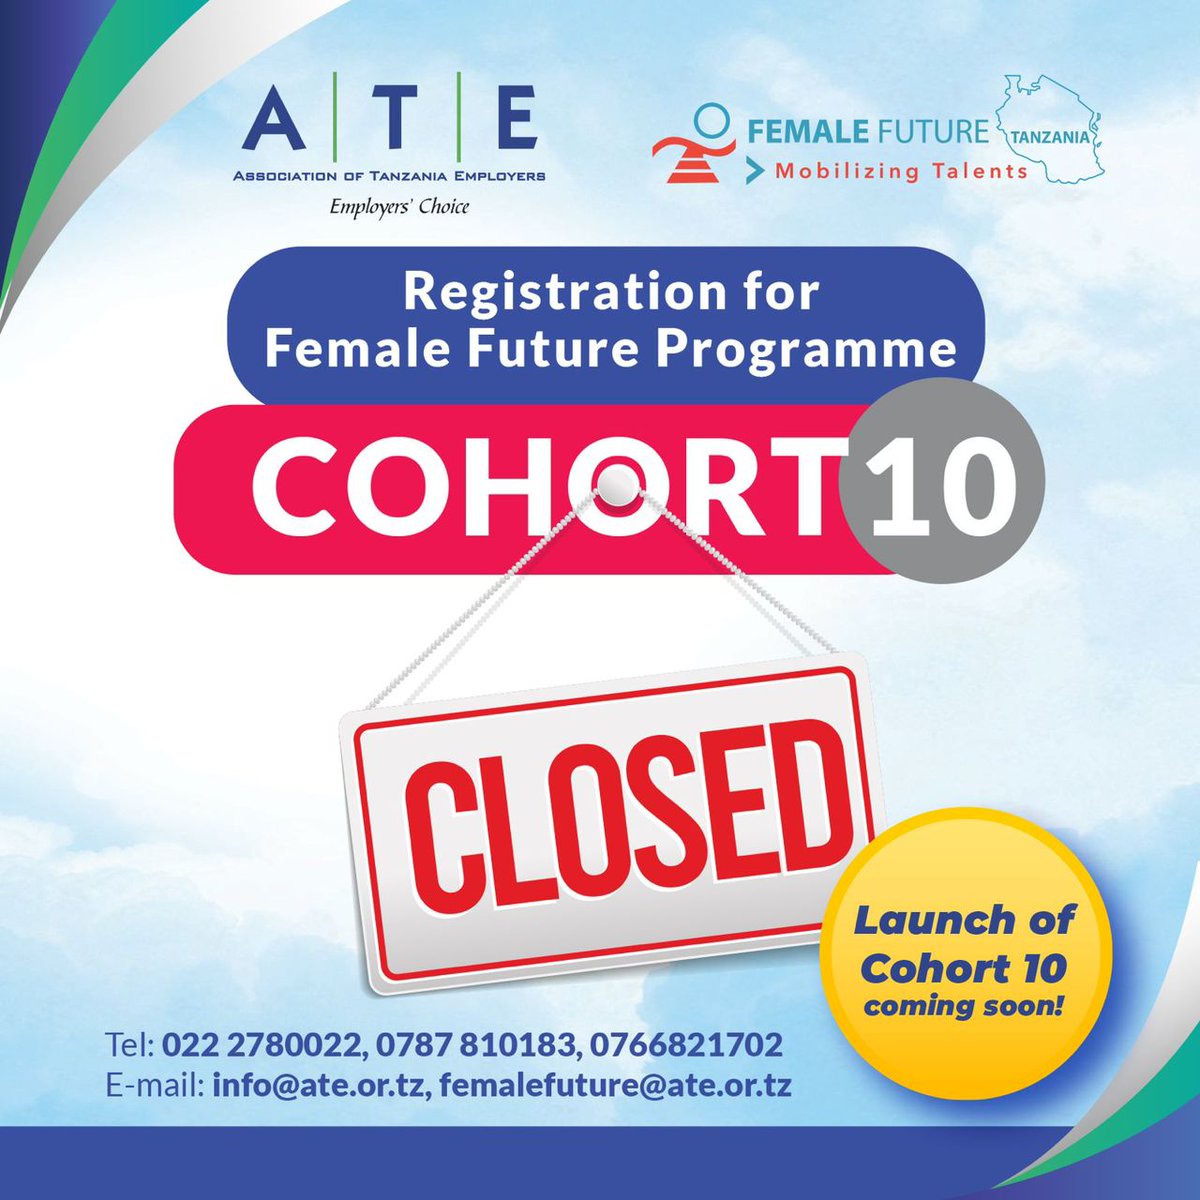 Dear Employers/Aspiring Female Leaders, Kindly note that, Cohort 10 has reached its full capacity and registration is officially closed. Thank you for keeping your ambitions for the FF Progamme alive. Plan early for the next Cohort in 2025. #FemaleFutureTz #FFCohort10